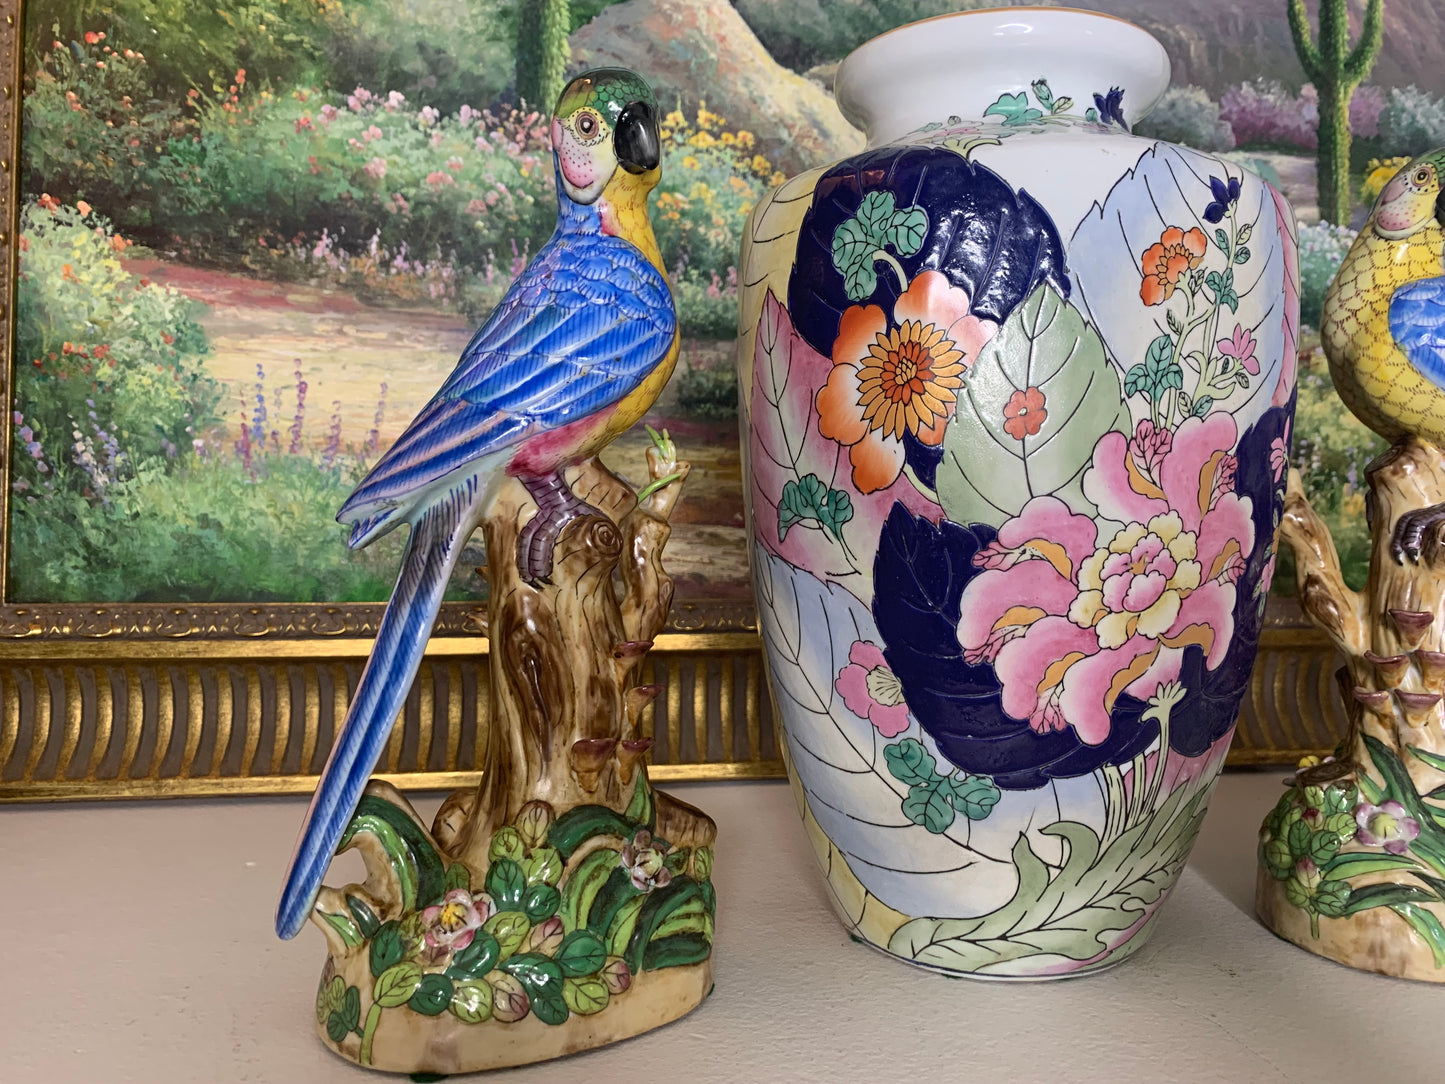 Stunning 11” tall Andrea by Sadek parrots with vivid hues, flowers, and intricate details! Excellent condition!